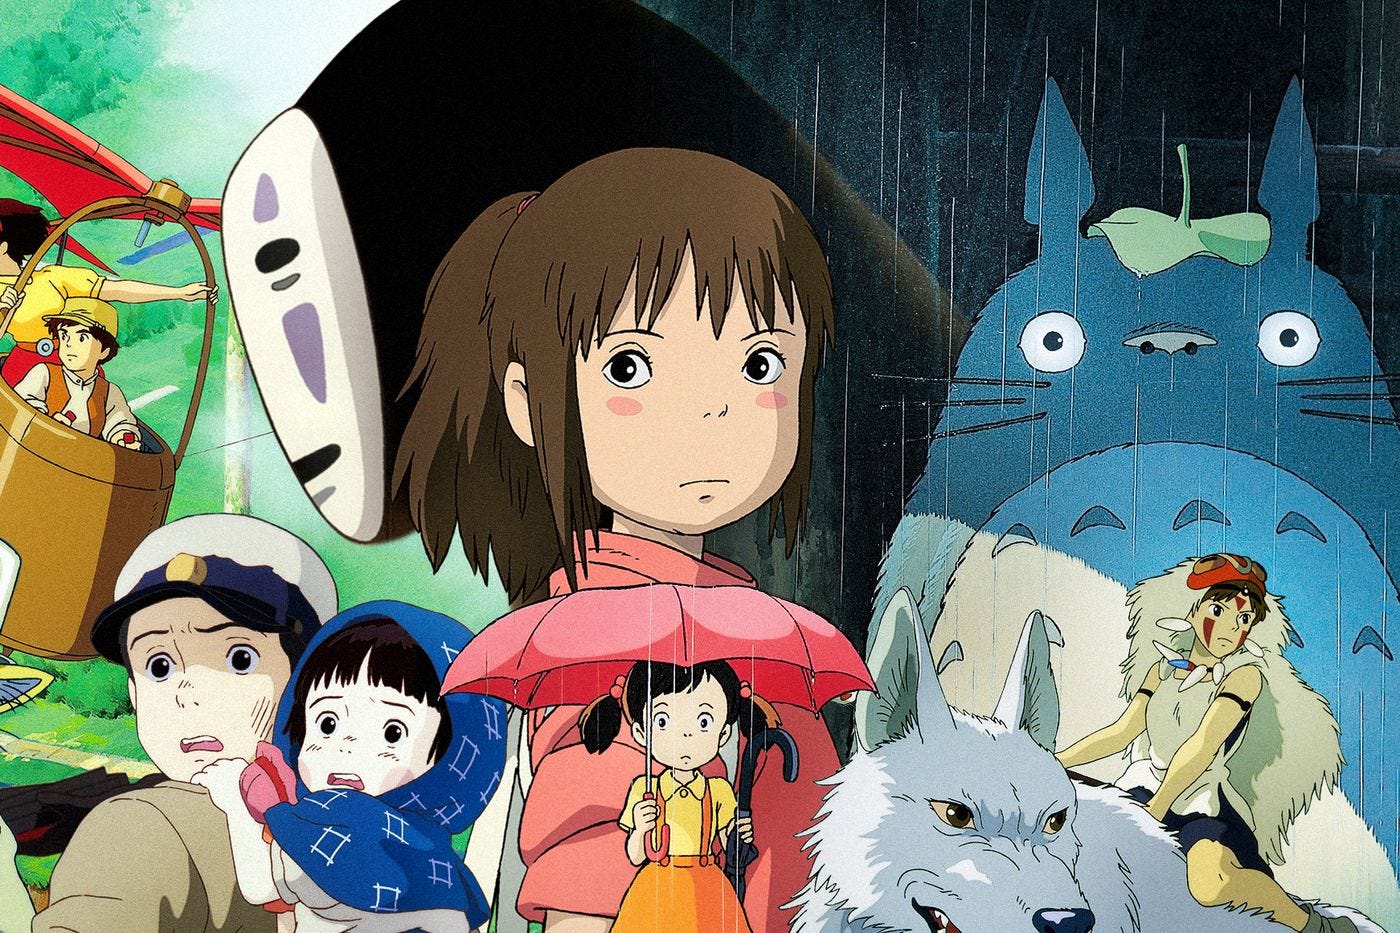 The Best & Worst Studio Ghibli Films (According to Rotten Tomatoes